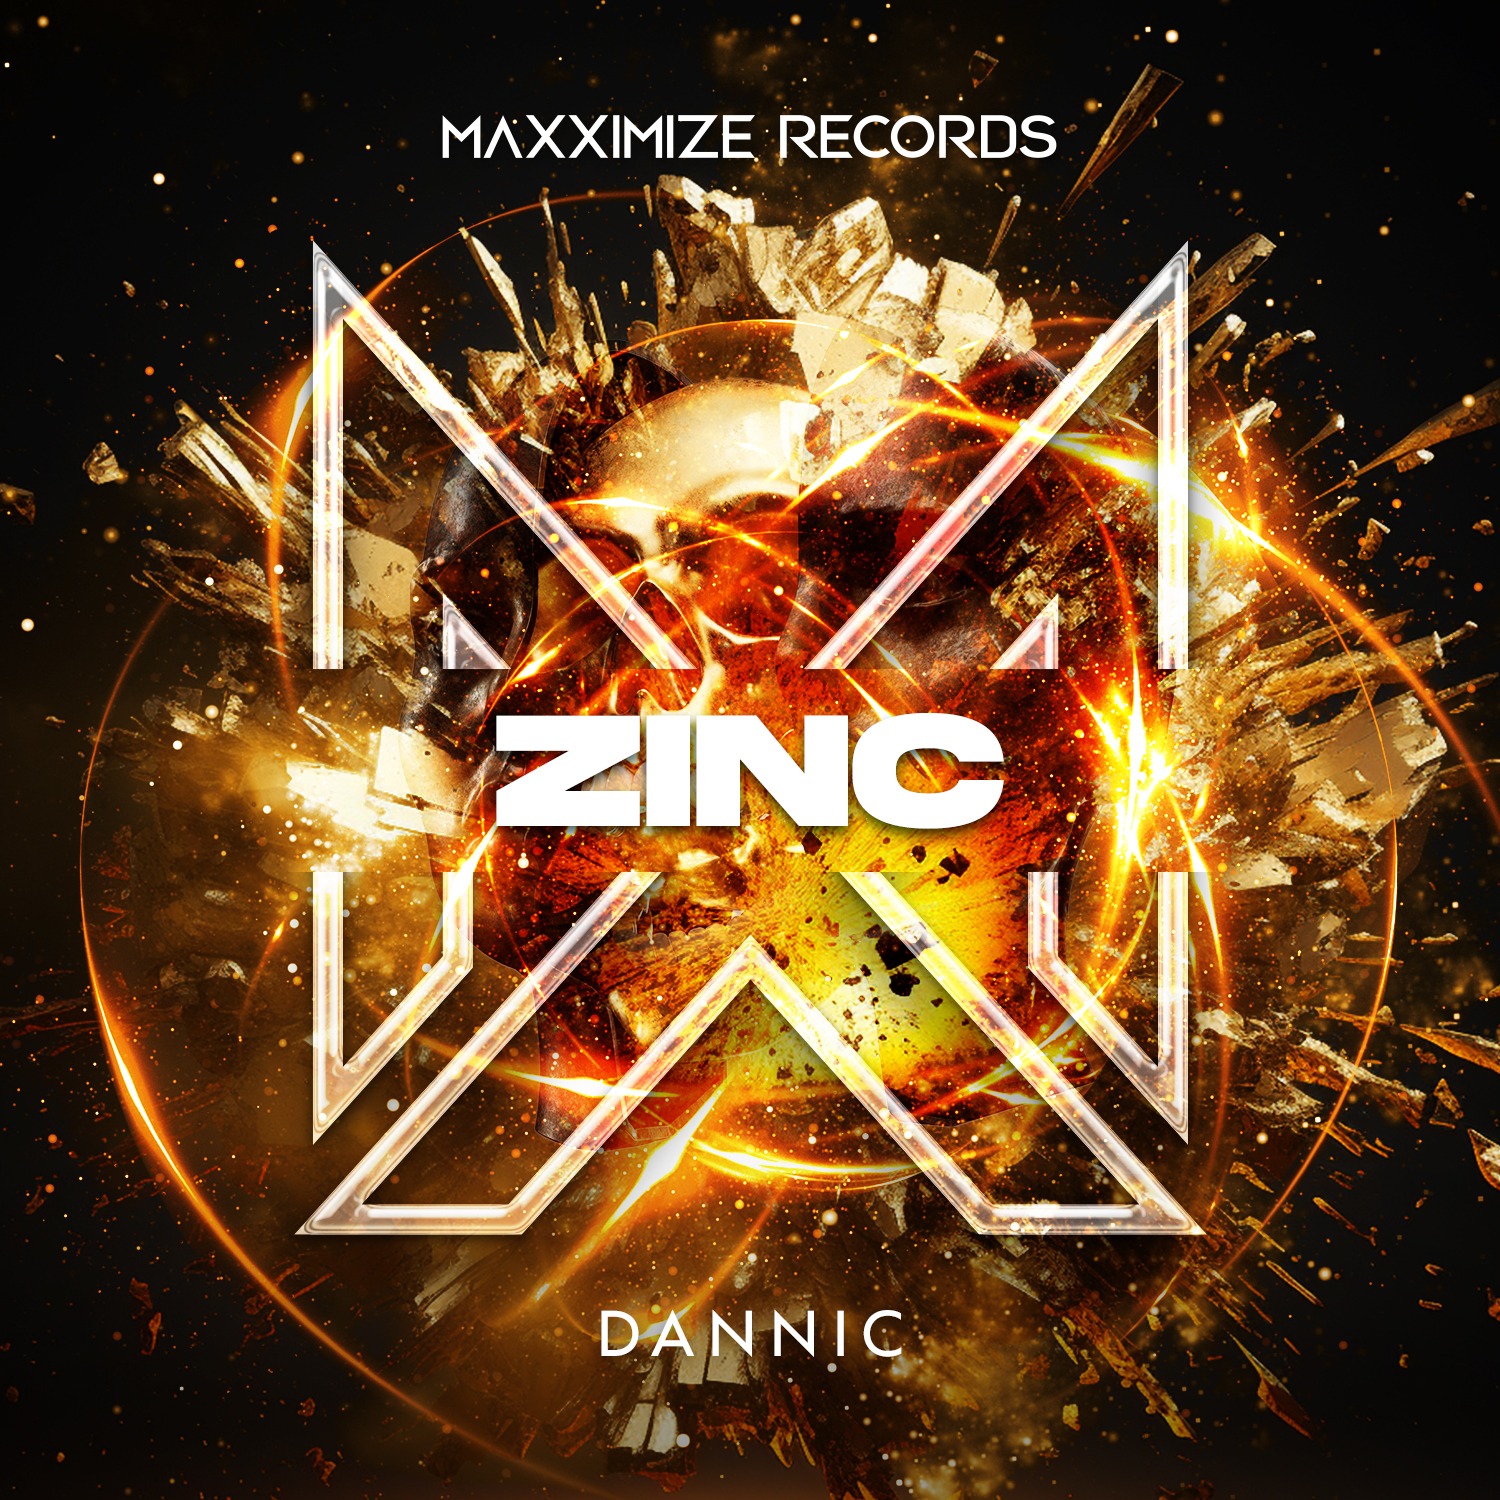 Dannic releases ‘Zinc” on Maxximize /Spinnin’